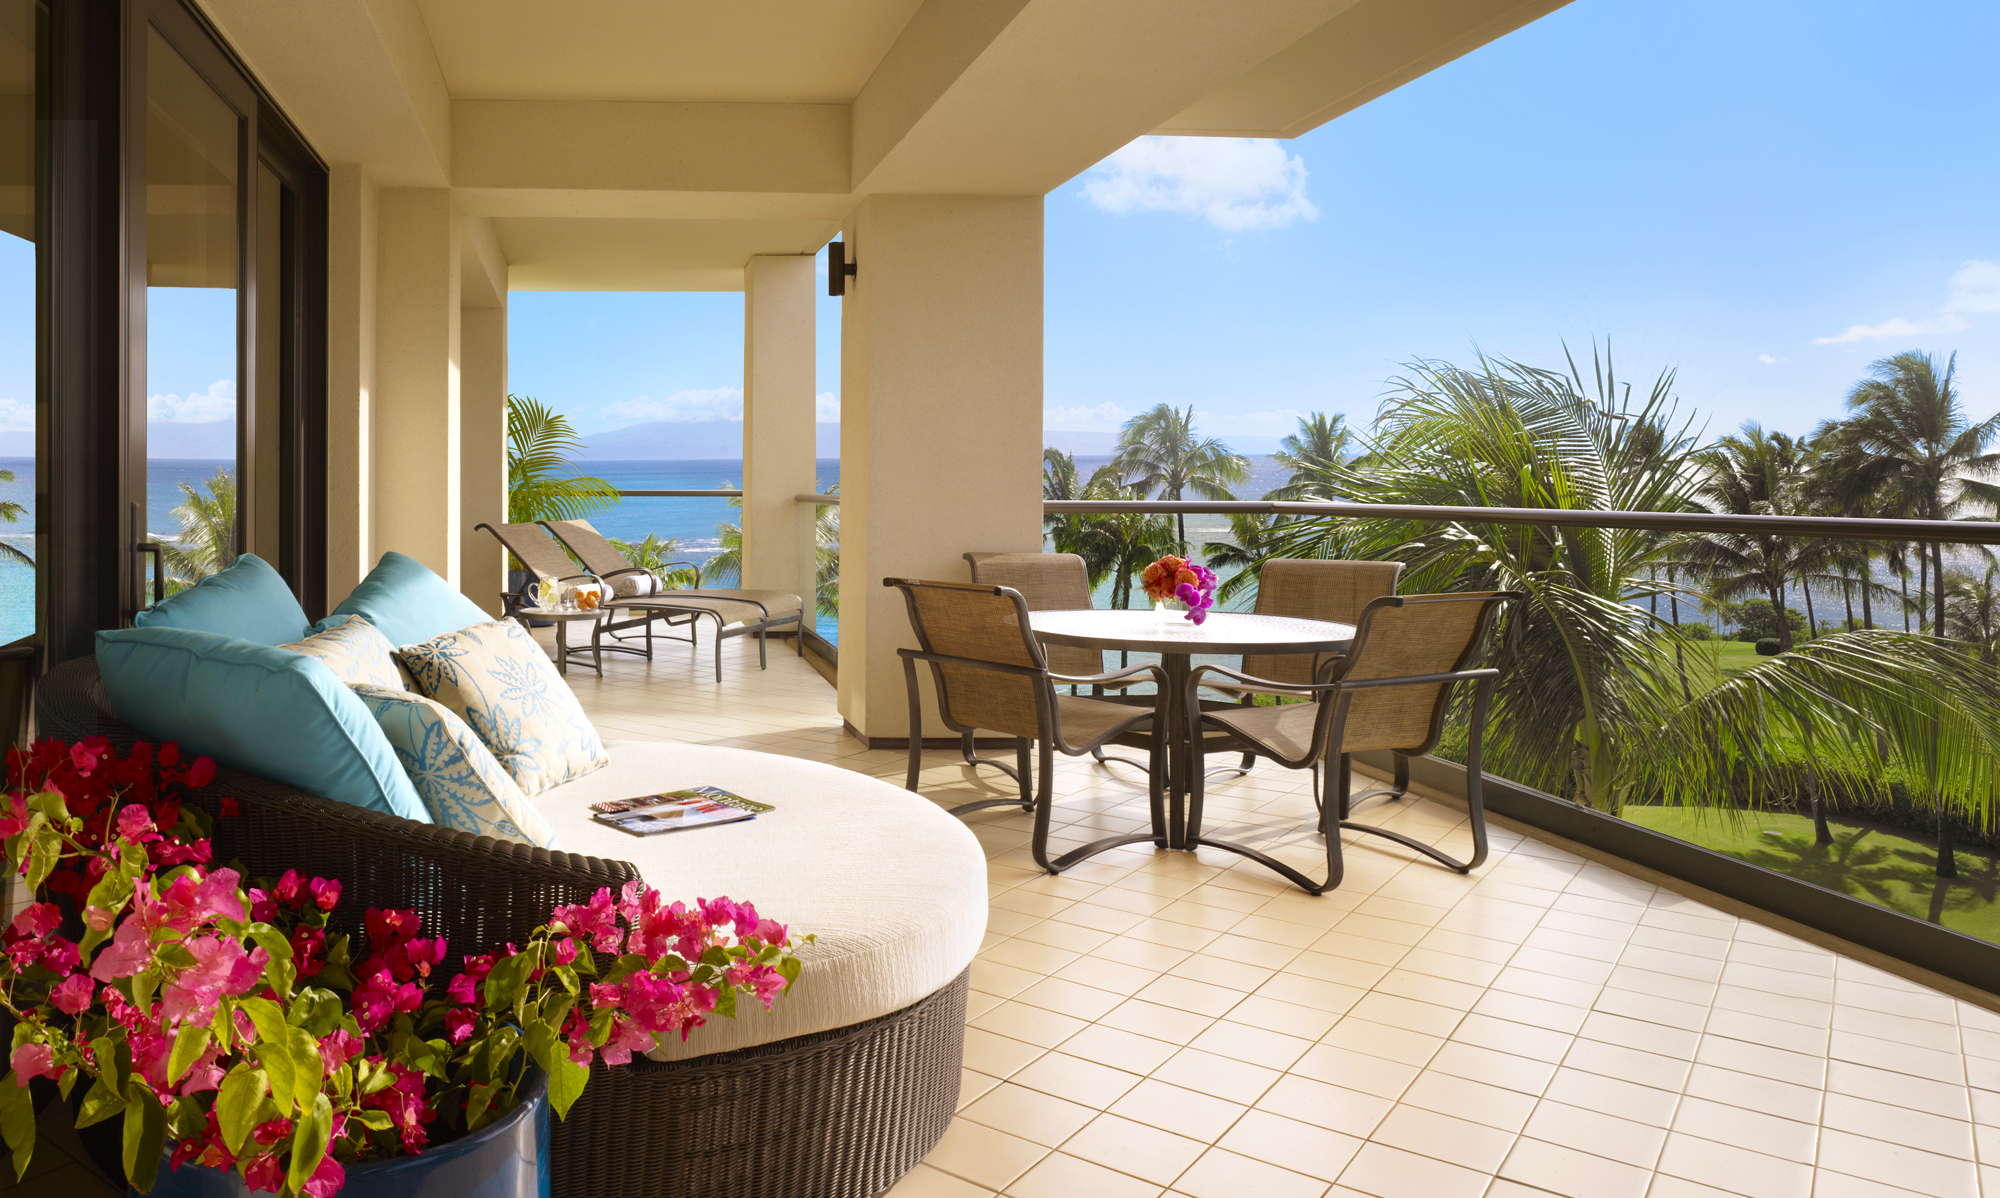 An expansive private lanai accessible from the living room and a master bedroom.